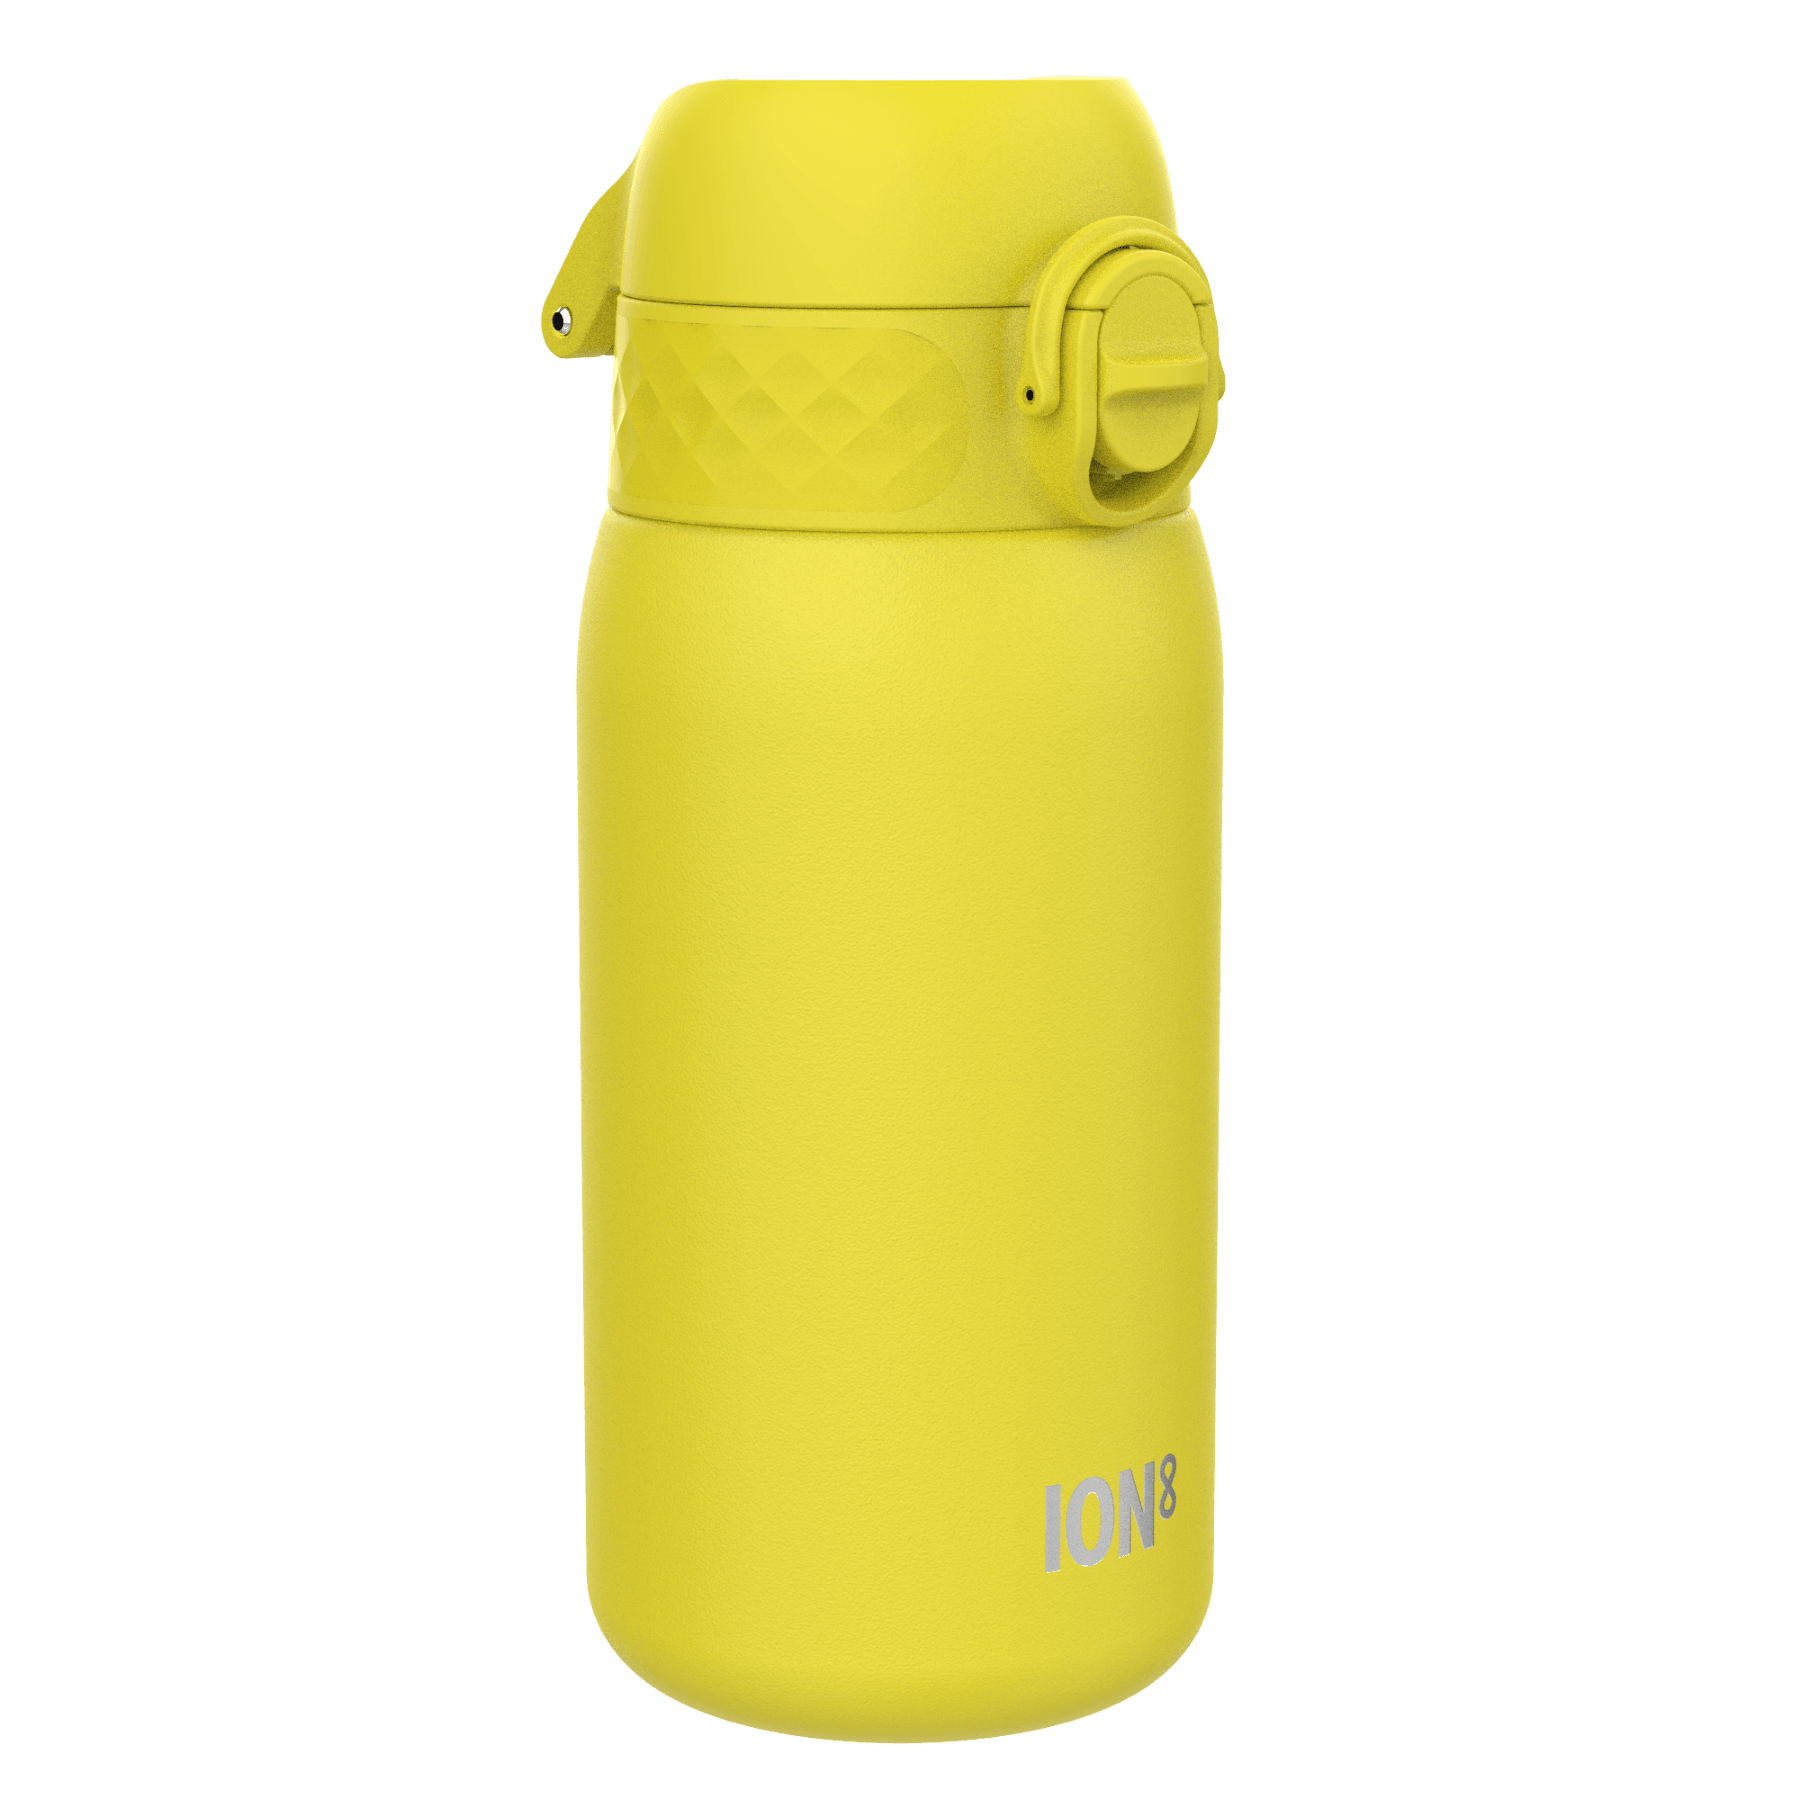 Ion8: Doppelwand 320 ml Stahl -Thermobottle